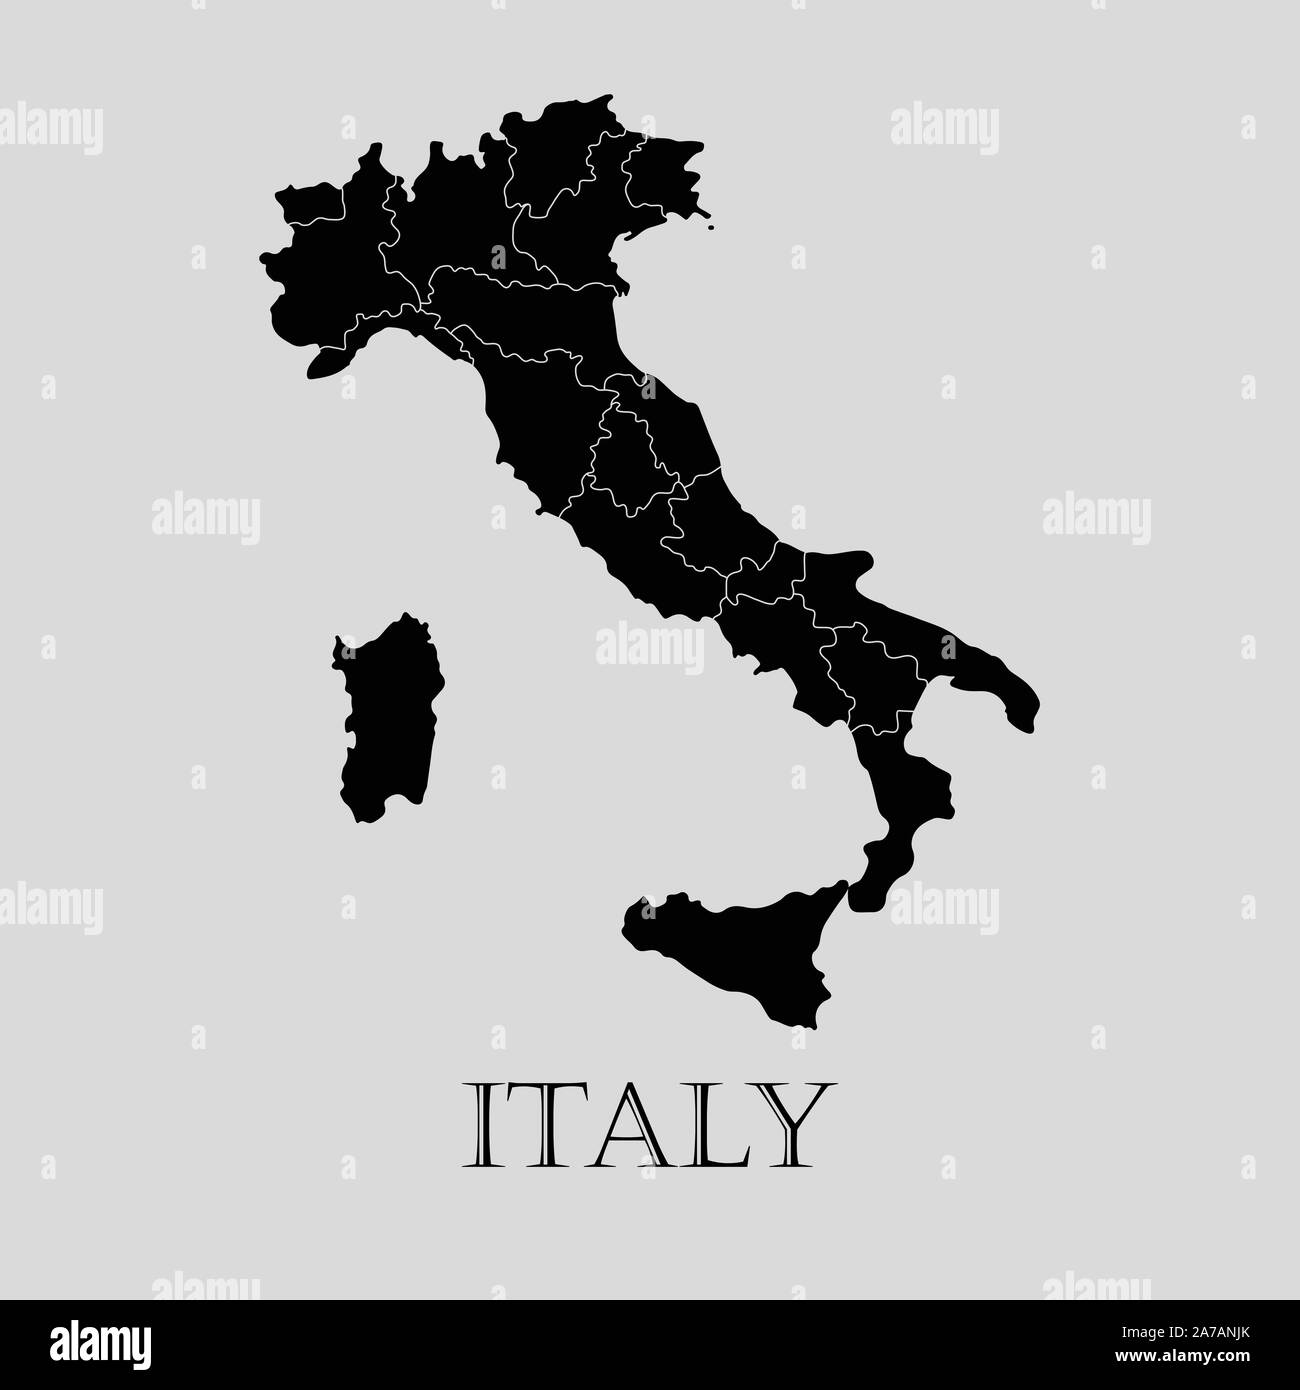 Black Italy map on light grey background. Black Italy map - vector illustration. Stock Vector